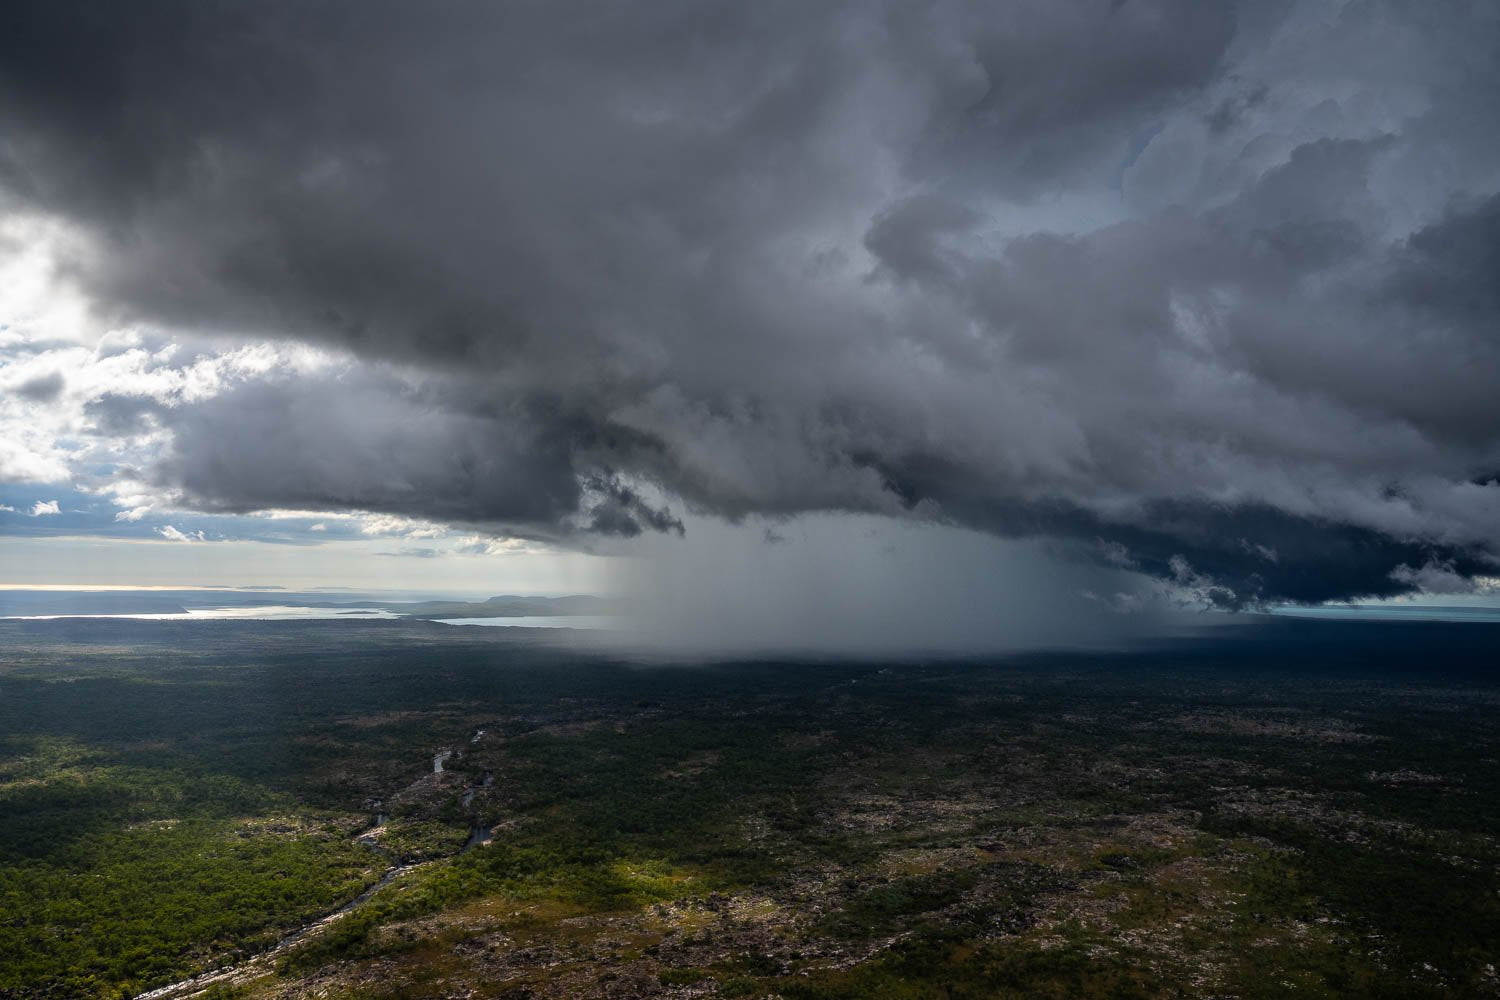 Giant clouds over a sea, creating a sea storm, Wet Season Downpour, The Kimberley